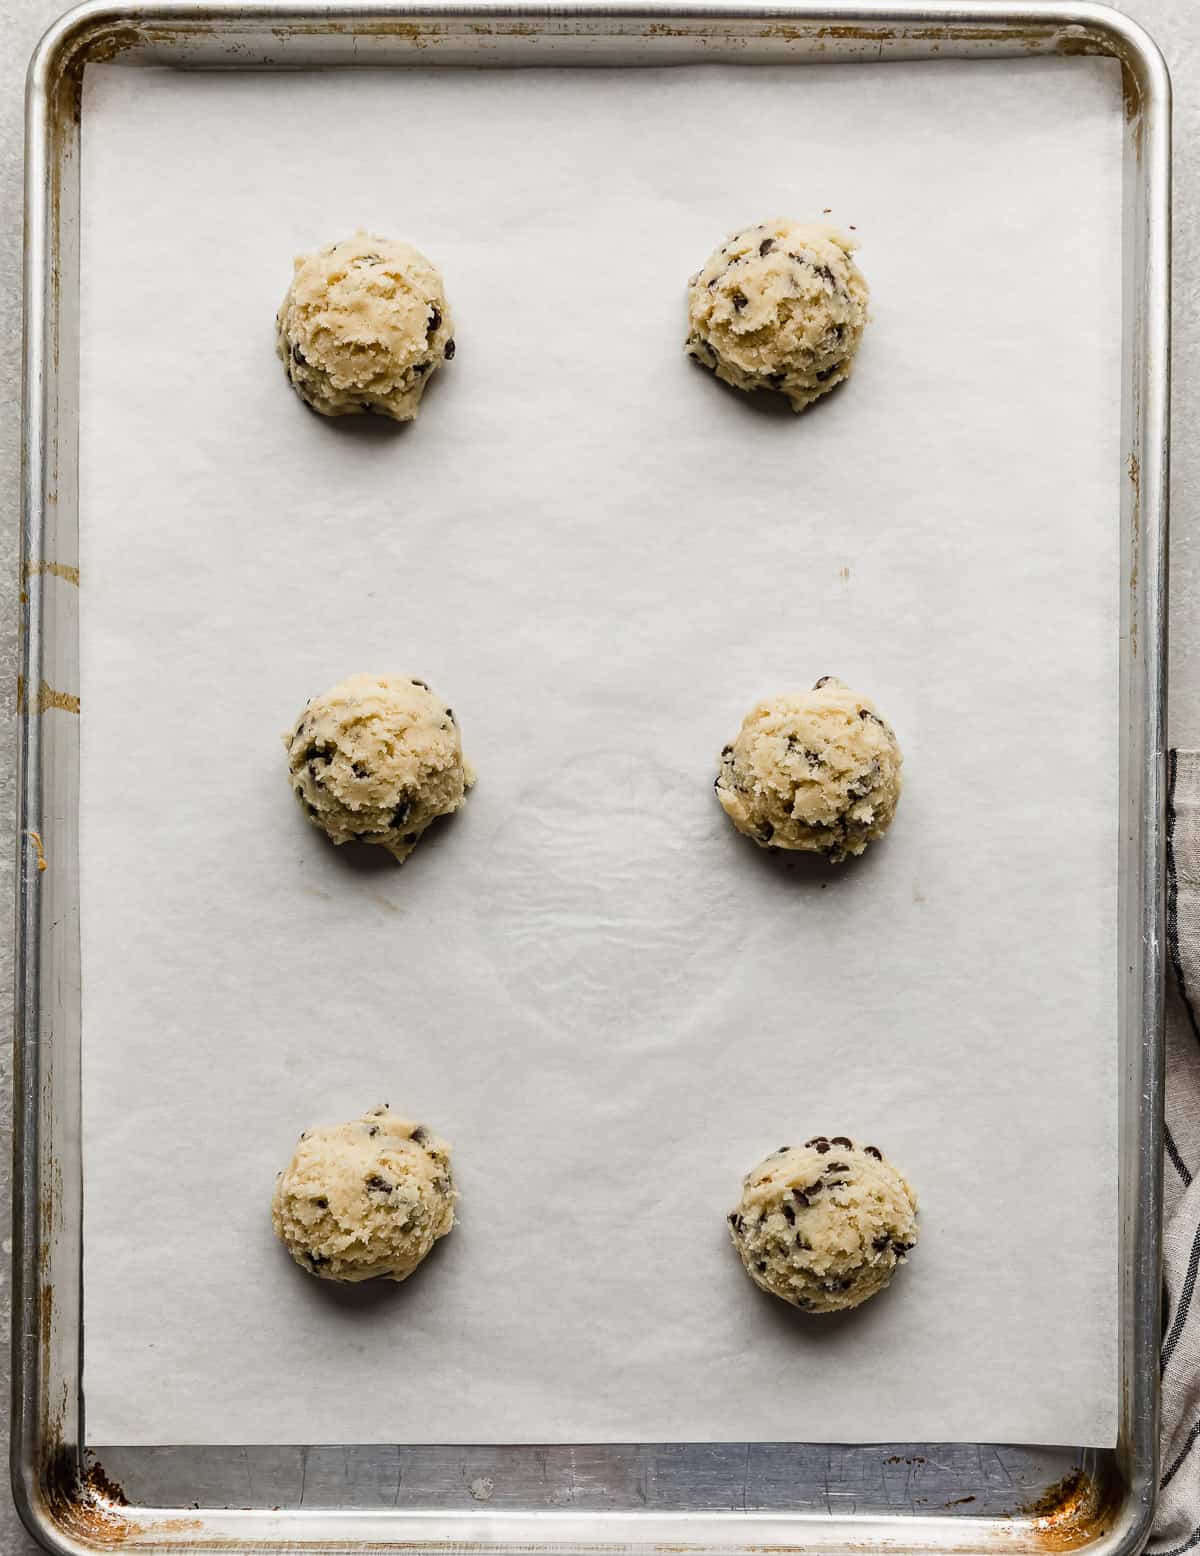 Six Crumbl Mint Chip Ice Cream Cookie dough balls on a white parchment lined baking sheet.